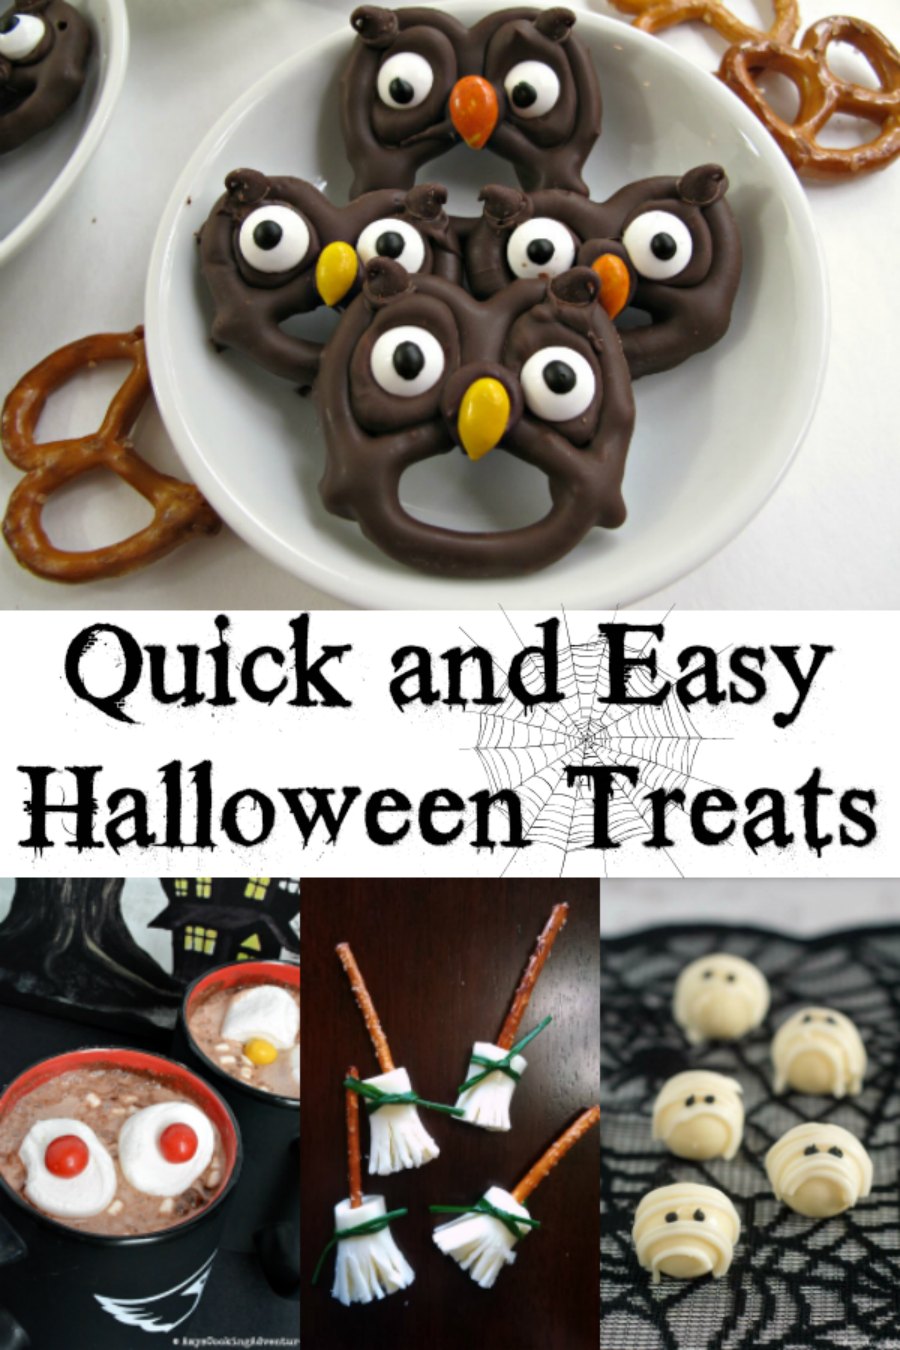 Super simple and super cute ideas to make Halloween a little spooooookier without taking much time. These quick and easy ideas and recipes are perfect for when you are in a hurry!